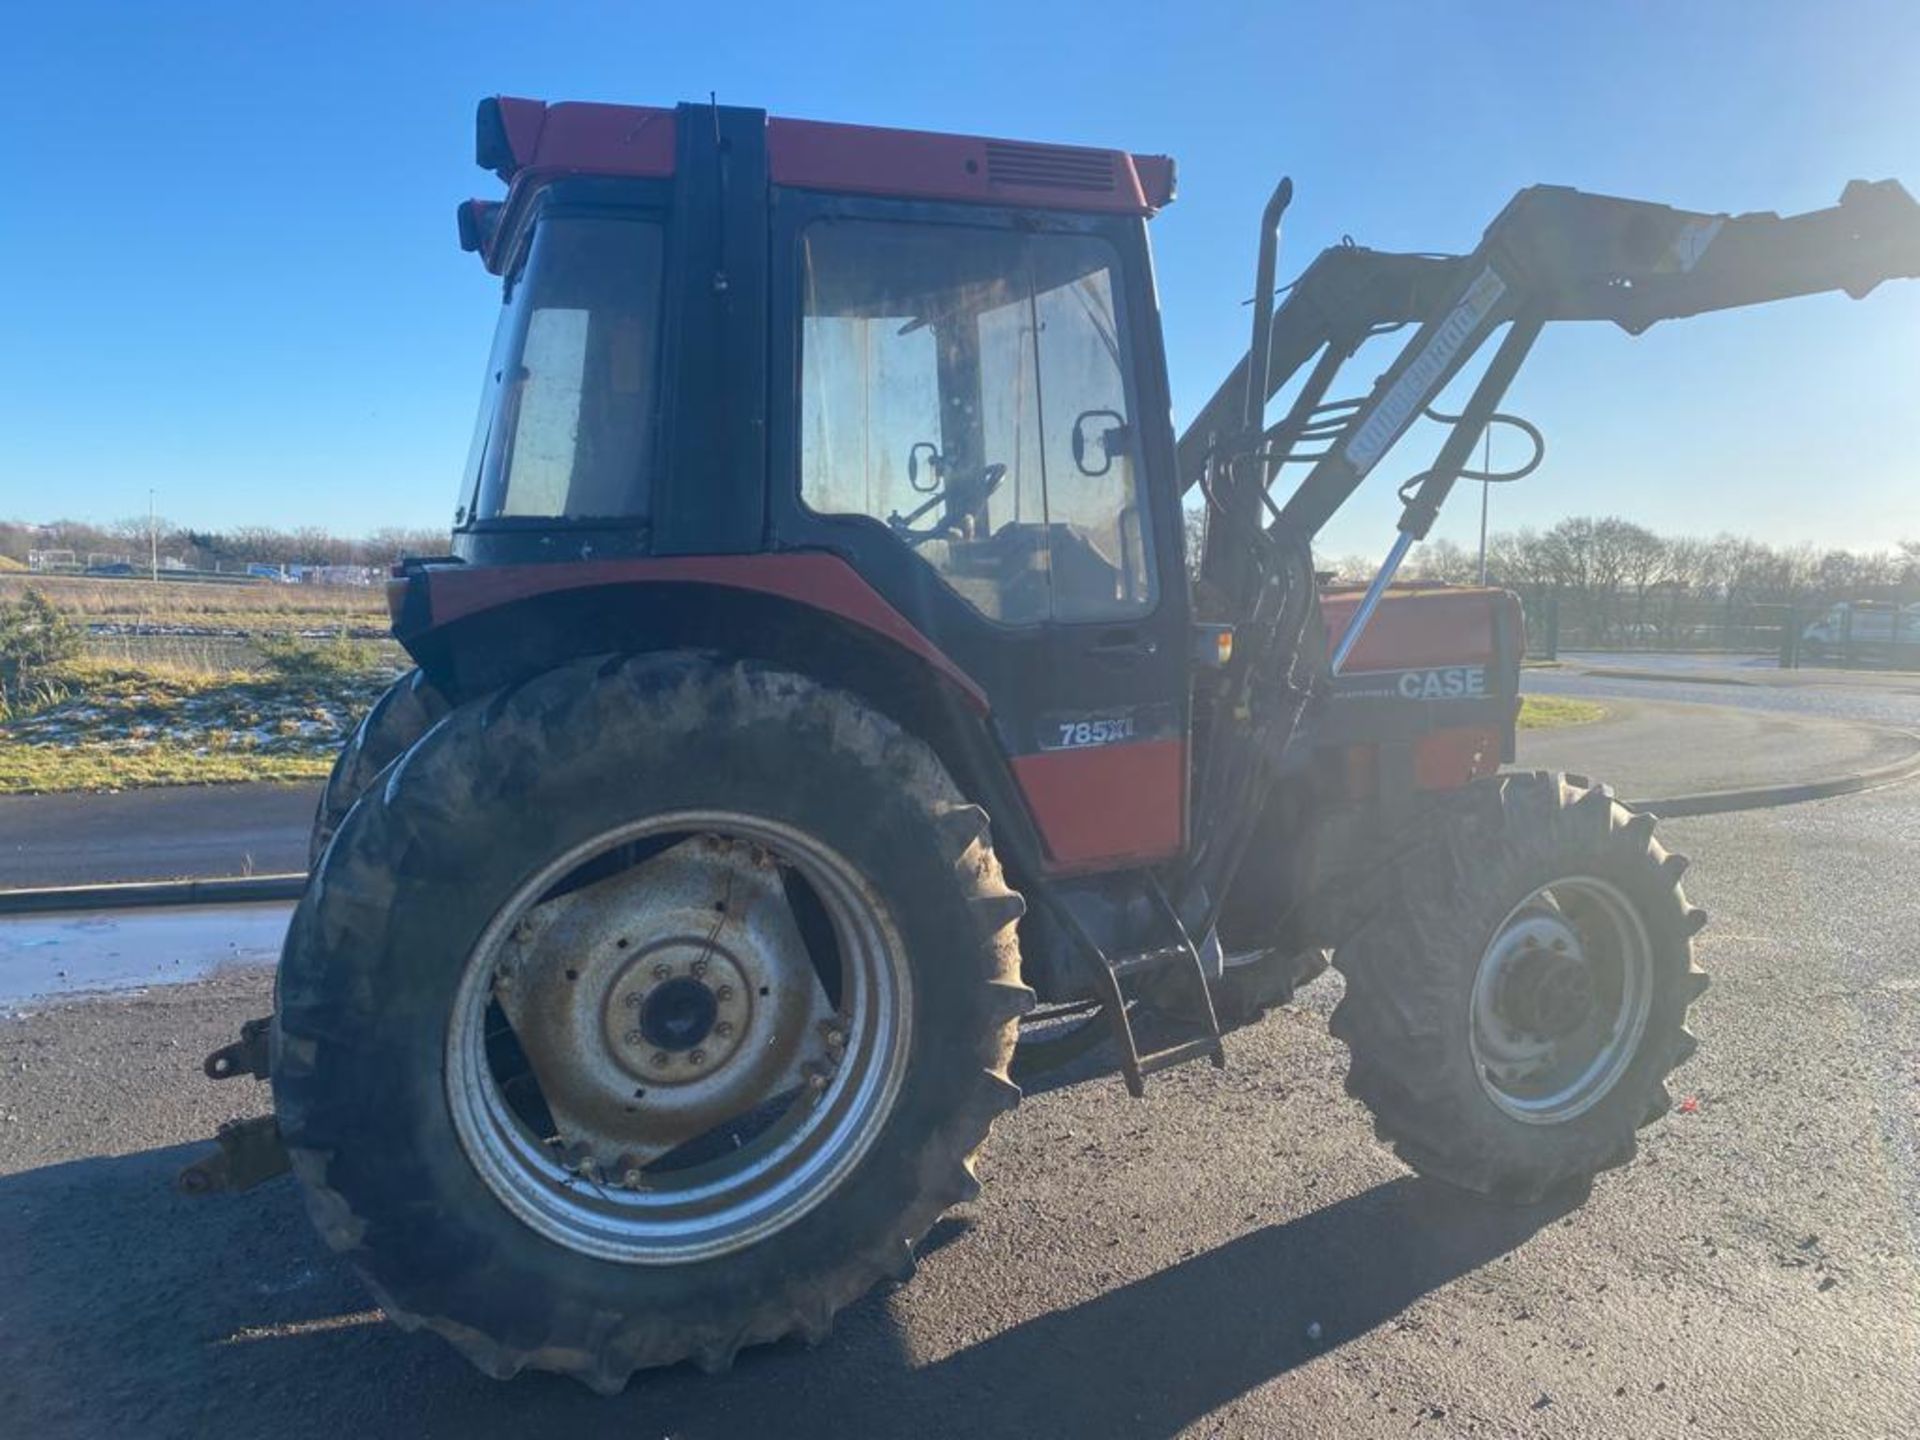 Case 785xl Tractor - 1996 - 6200 hours ** Reserve Reduced** - Image 4 of 9